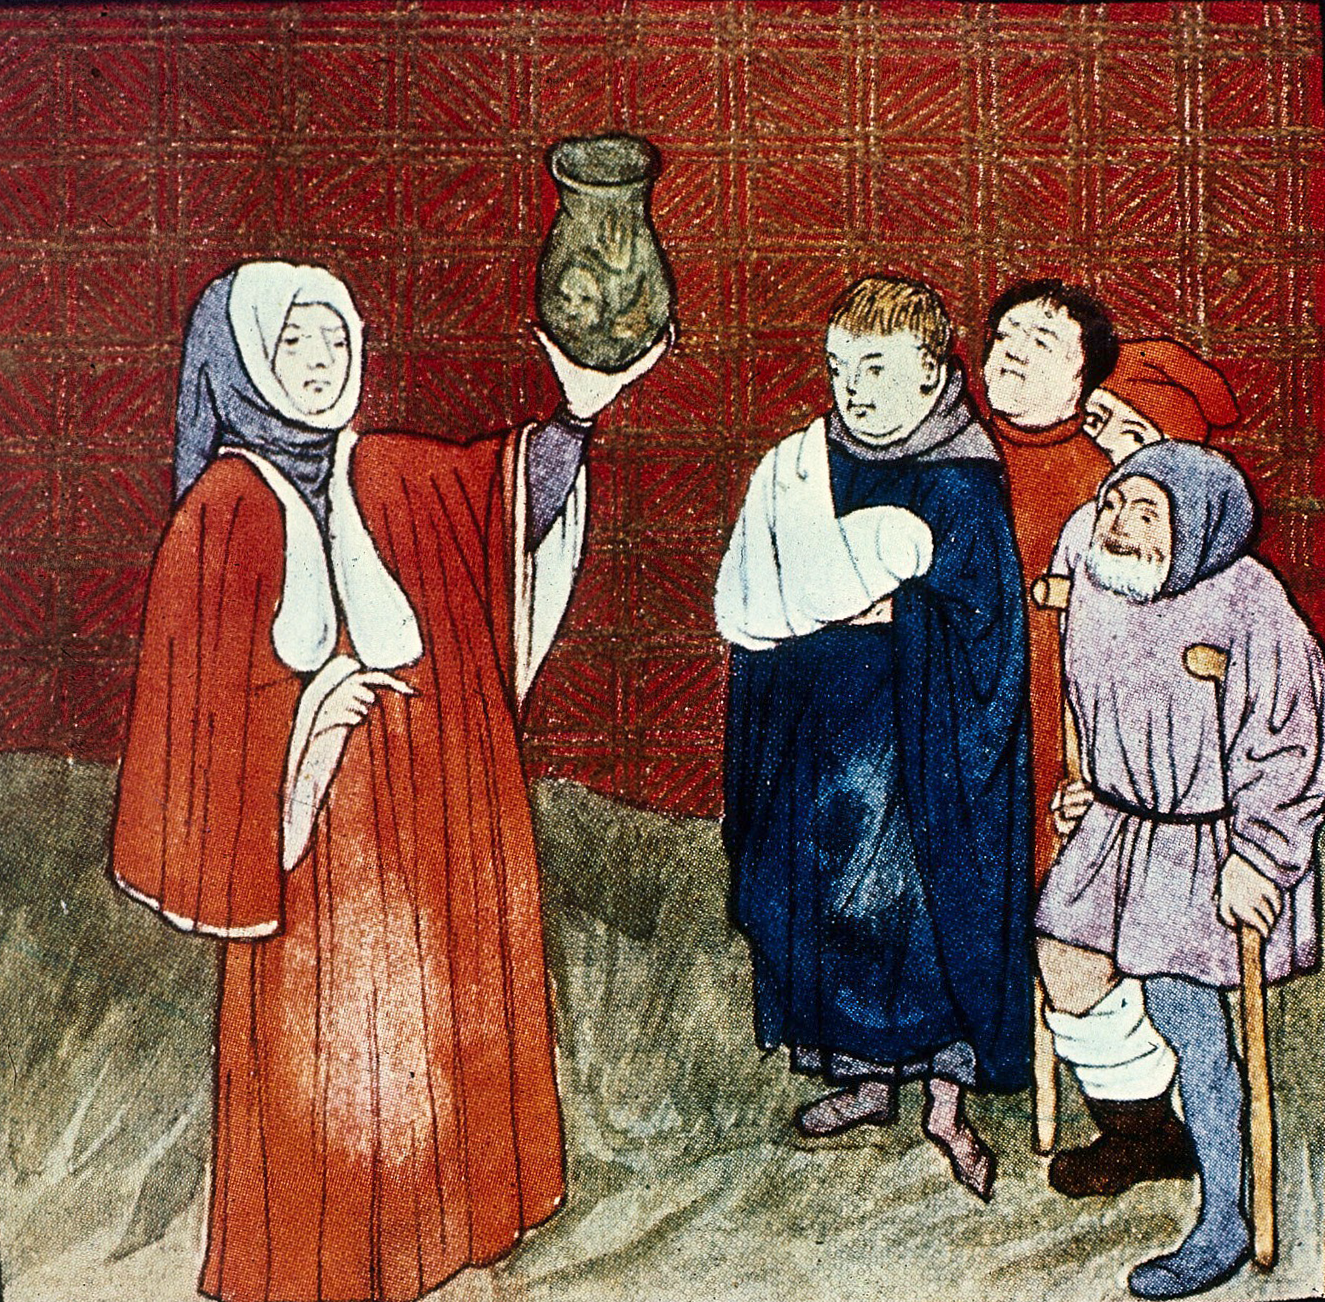 Physician with a urine flask, from a medieval manuscript. Wellcome Collection (CC BY 4.0).